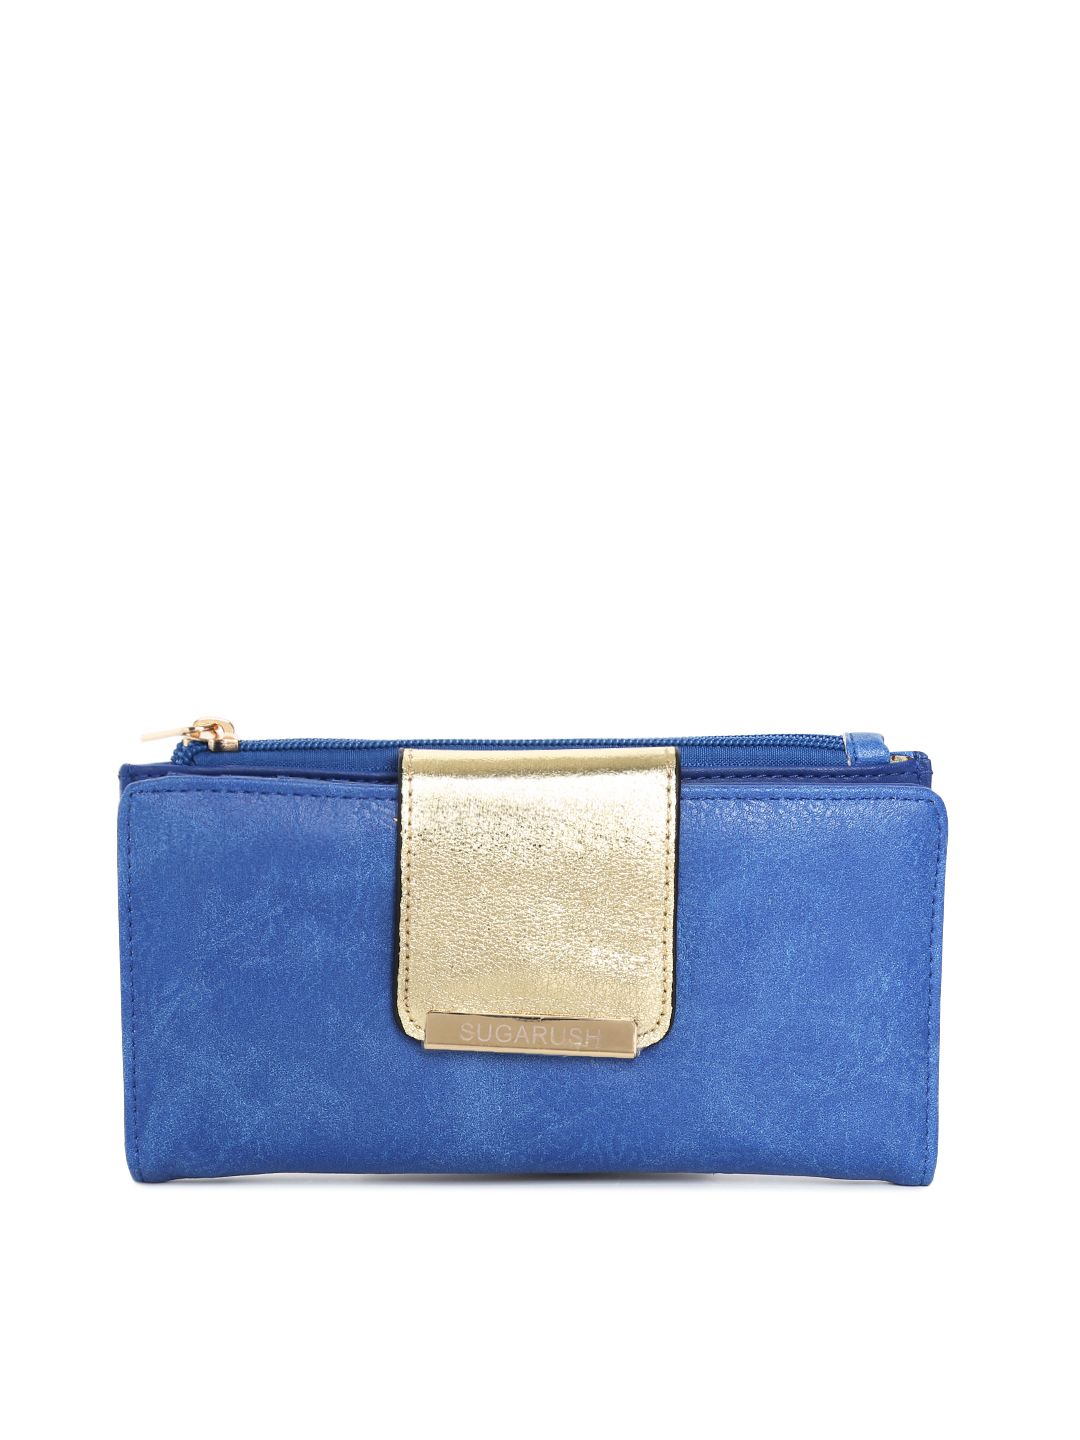 Sugarush Women Blue Two Fold Wallet Price in India